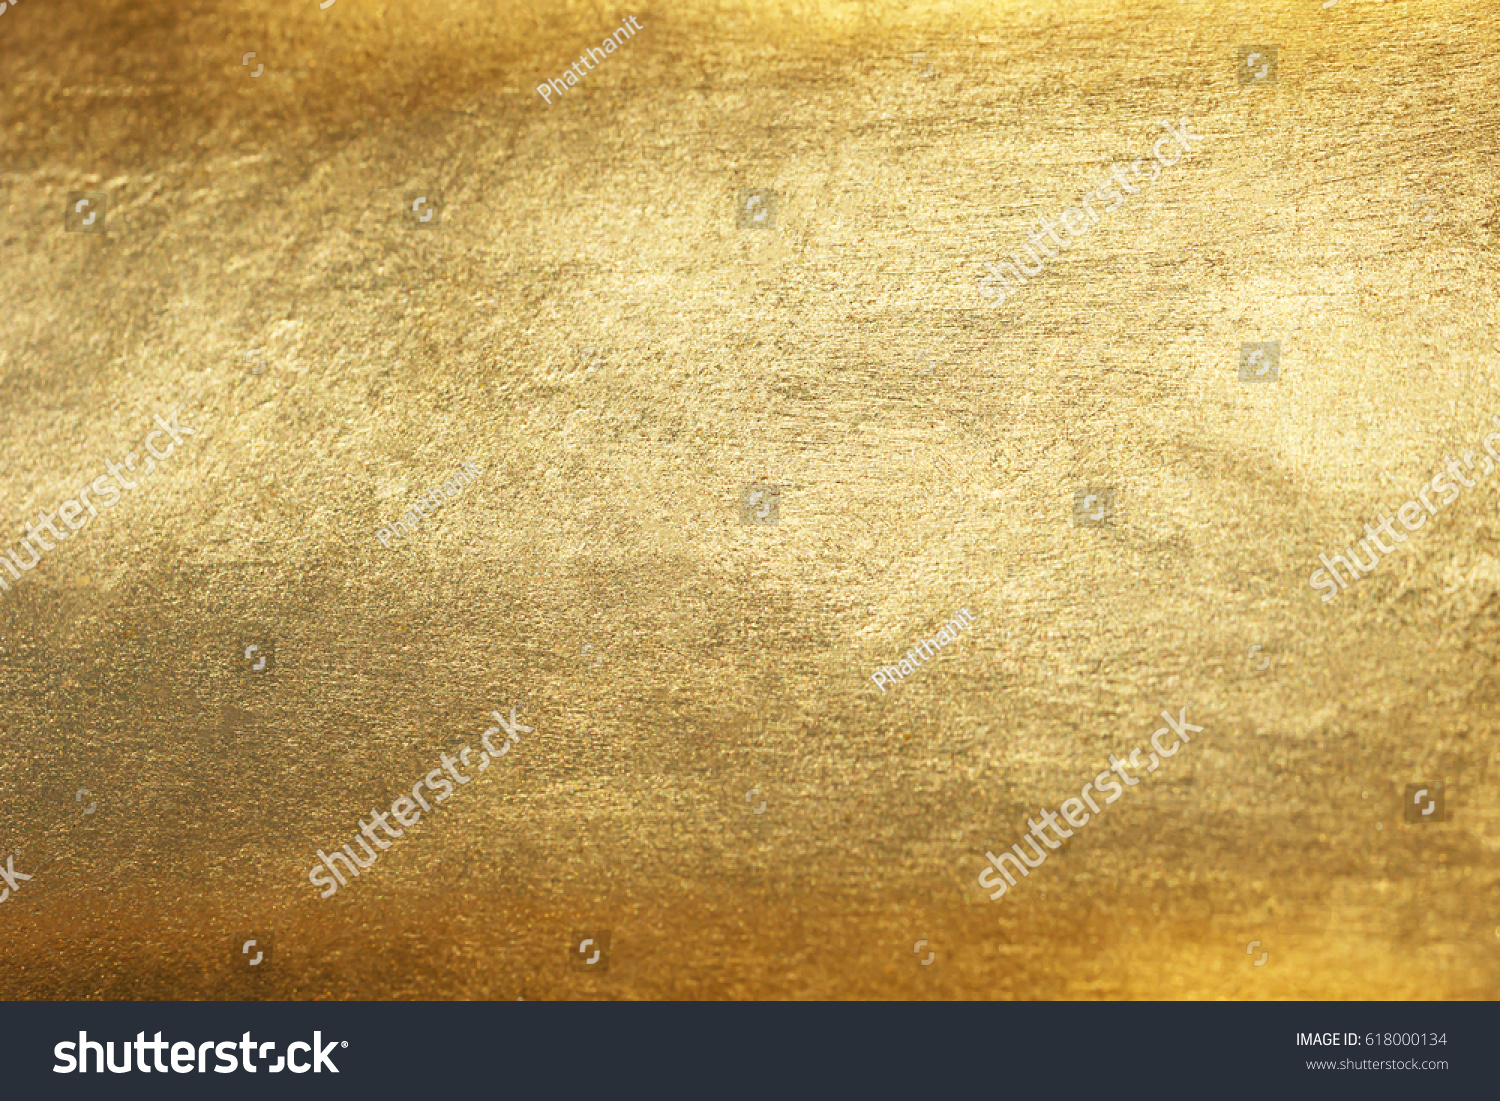 Gold background or texture and gradients shadow. #618000134